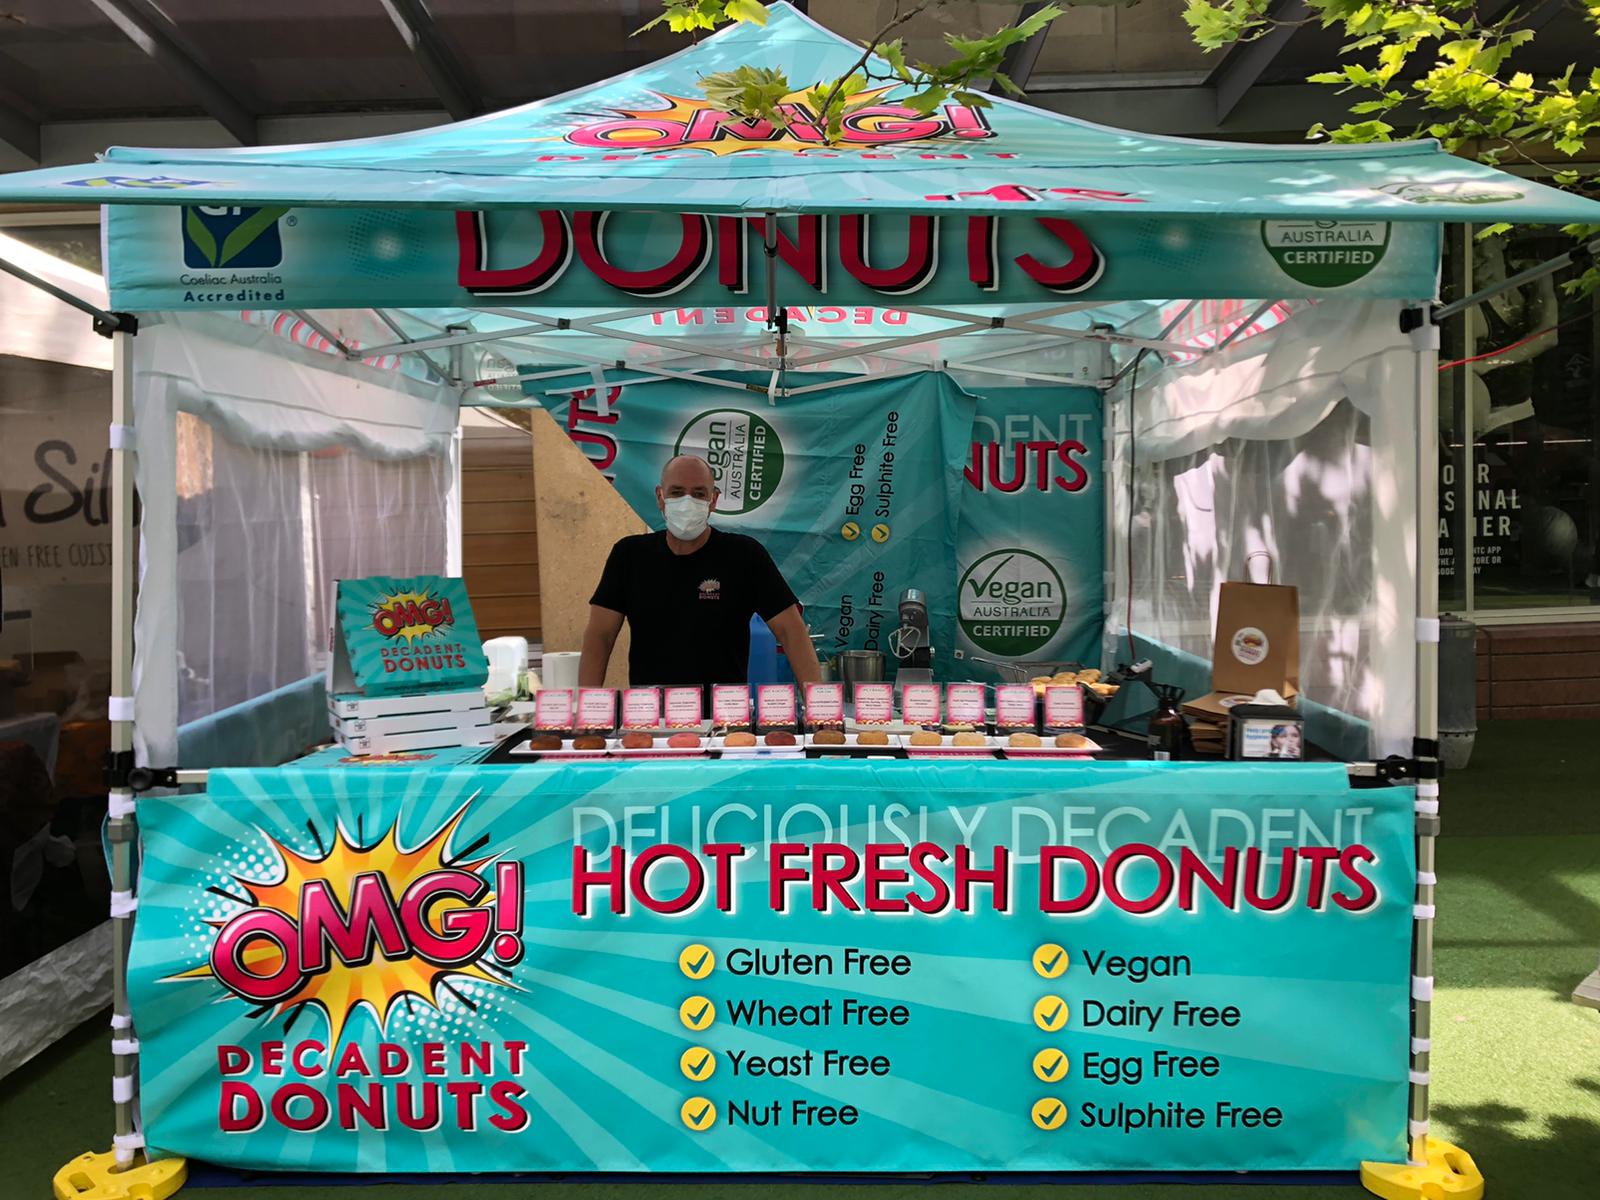 Hot Fresh Donuts that are Gluten free and Vegan. Also meet the crew behind Hornsby